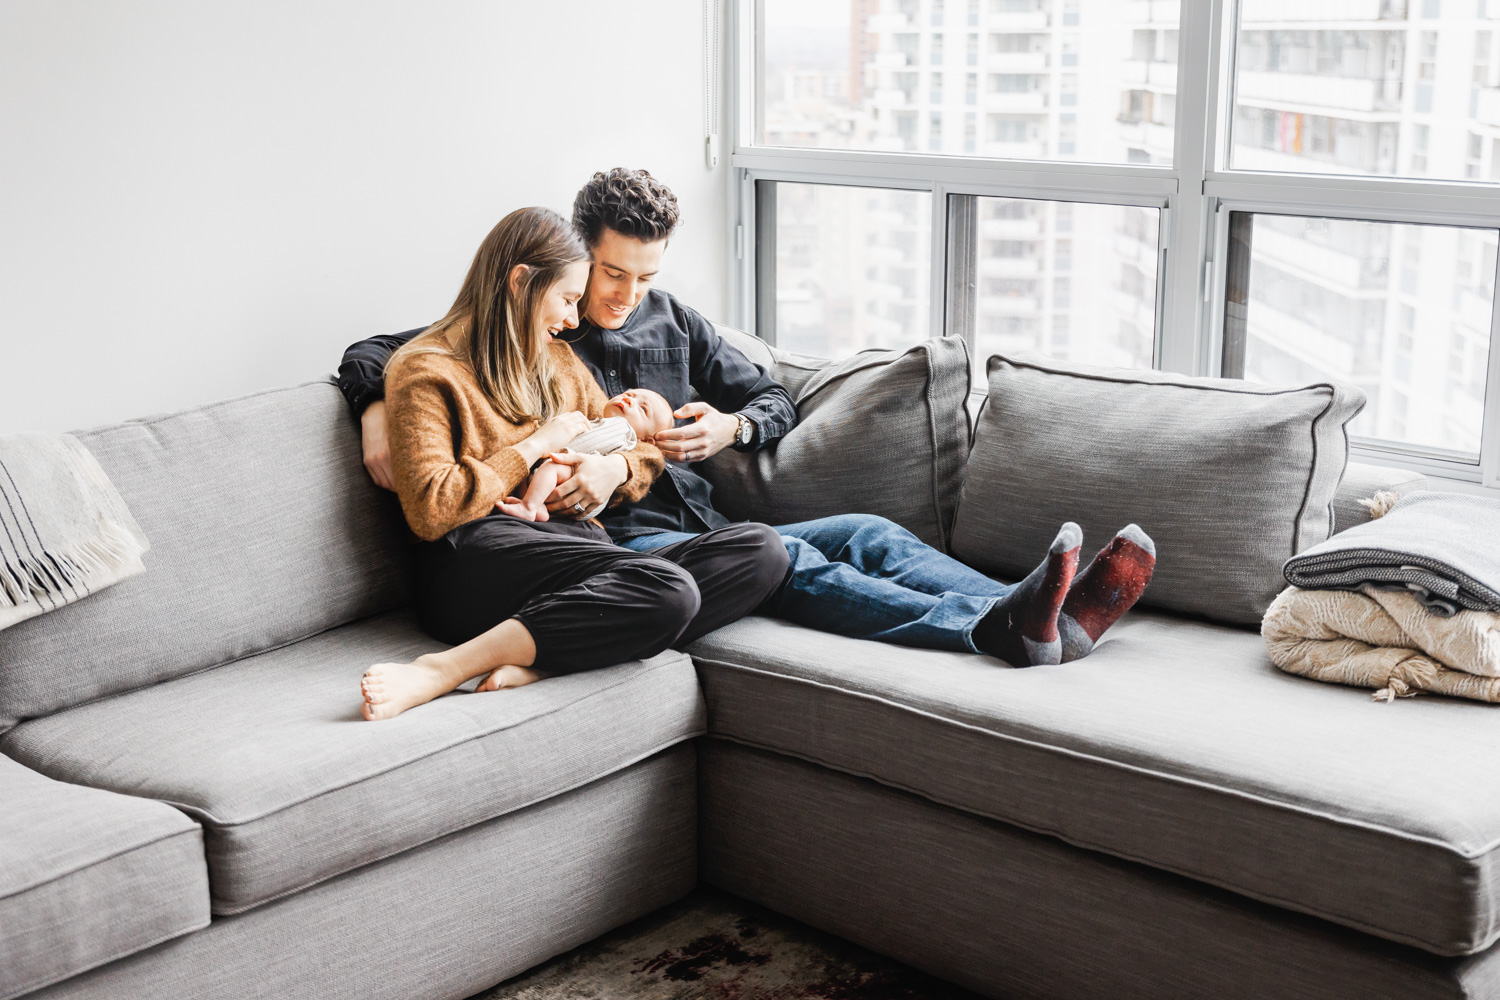 Parents hanging out with newborn son on grey living room couch